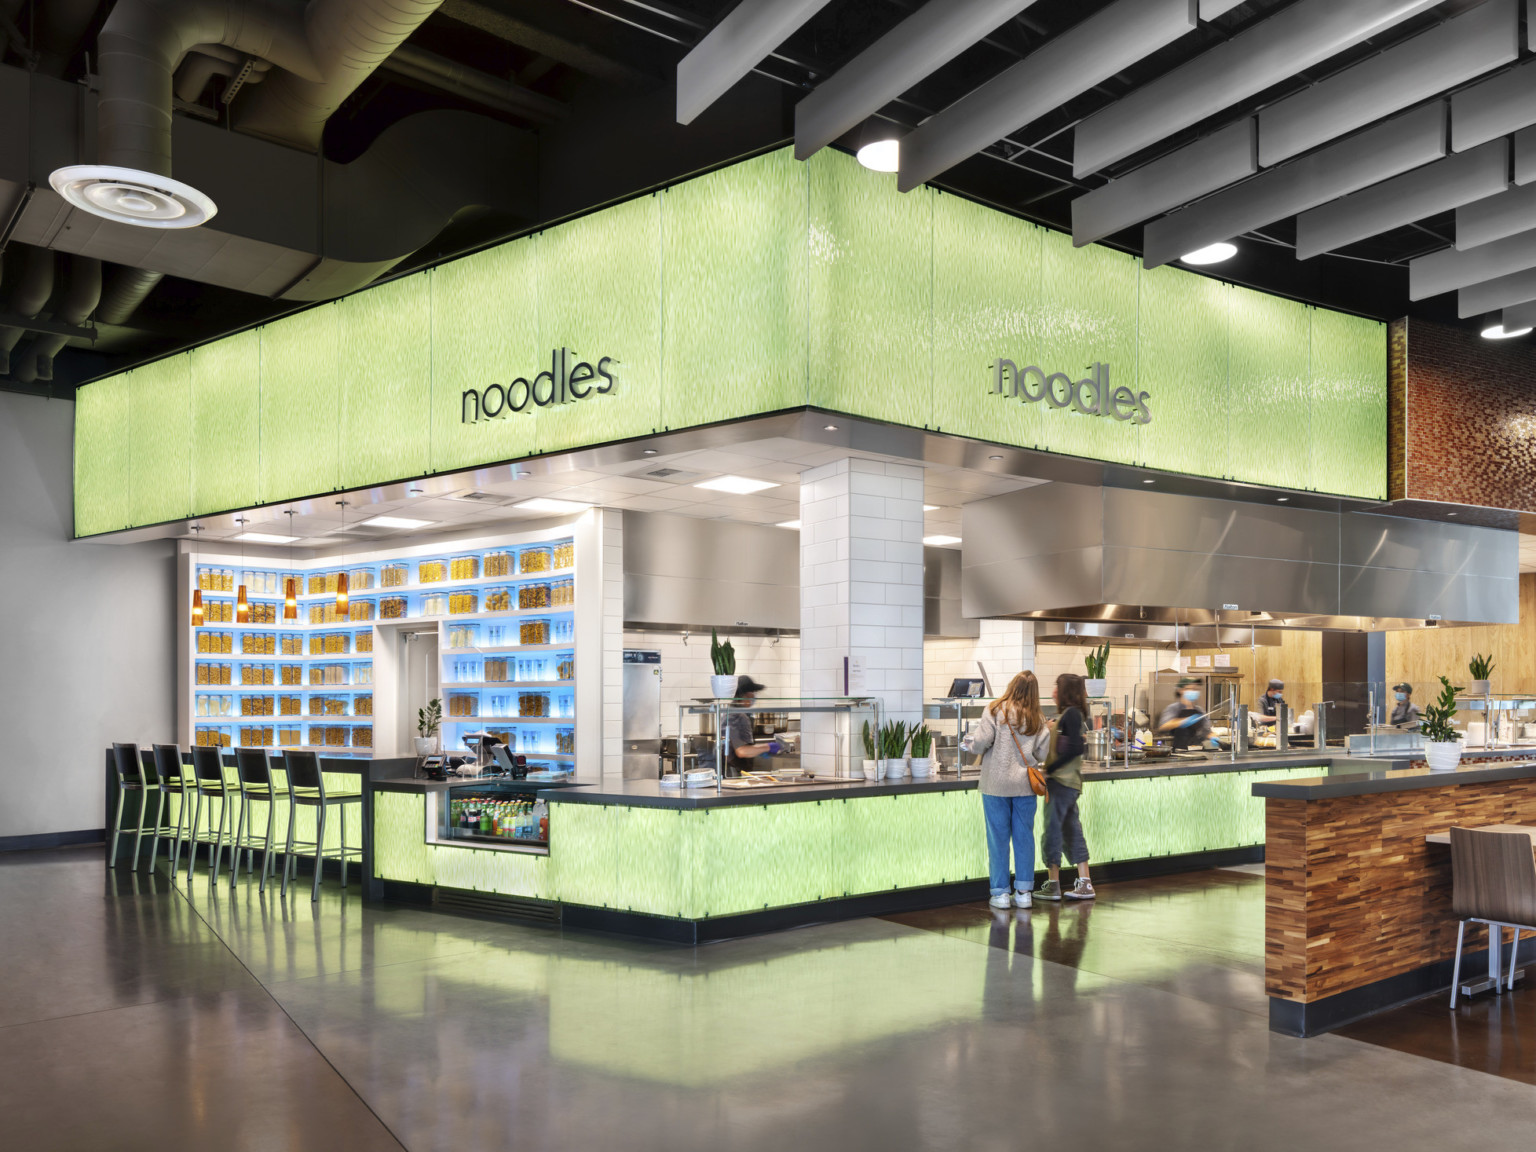 Illuminated green food station labeled noodles with bar seating left. Grey hanging panel details, exposed ducts along ceiling